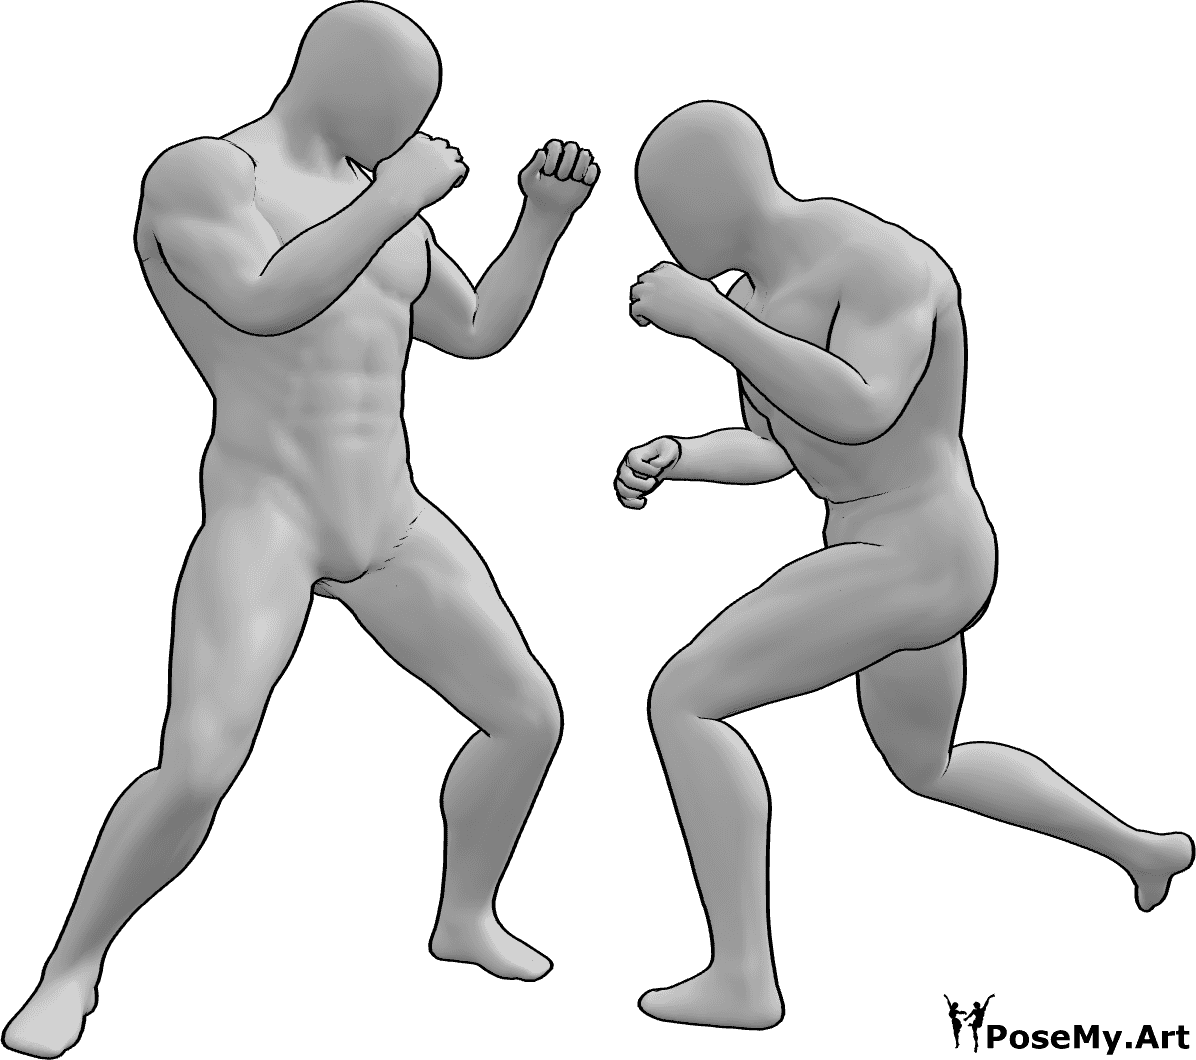 Pose Reference - Muscle males fighting pose - Two muscle males are fighting, boxing muscle males pose